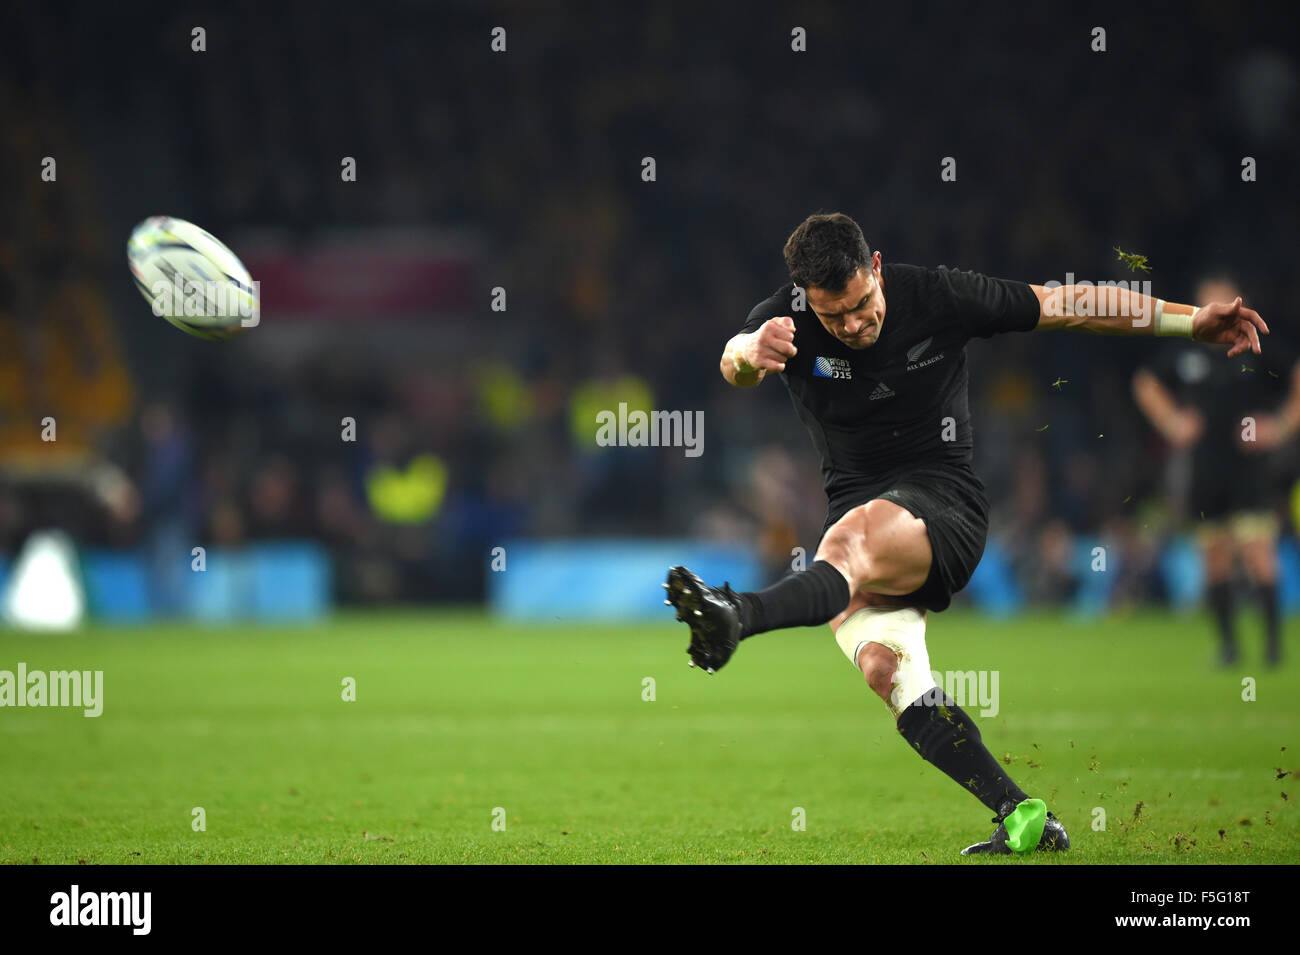 London, UK. 31st Oct, 2015. Dan Carter (NZL) Rugby : Dan Carter of New Zealand takes a kick during the 2015 Rugby World Cup final match between New Zealand and Australia at Twickenham in London, England . © FAR EAST PRESS/AFLO/Alamy Live News Stock Photo